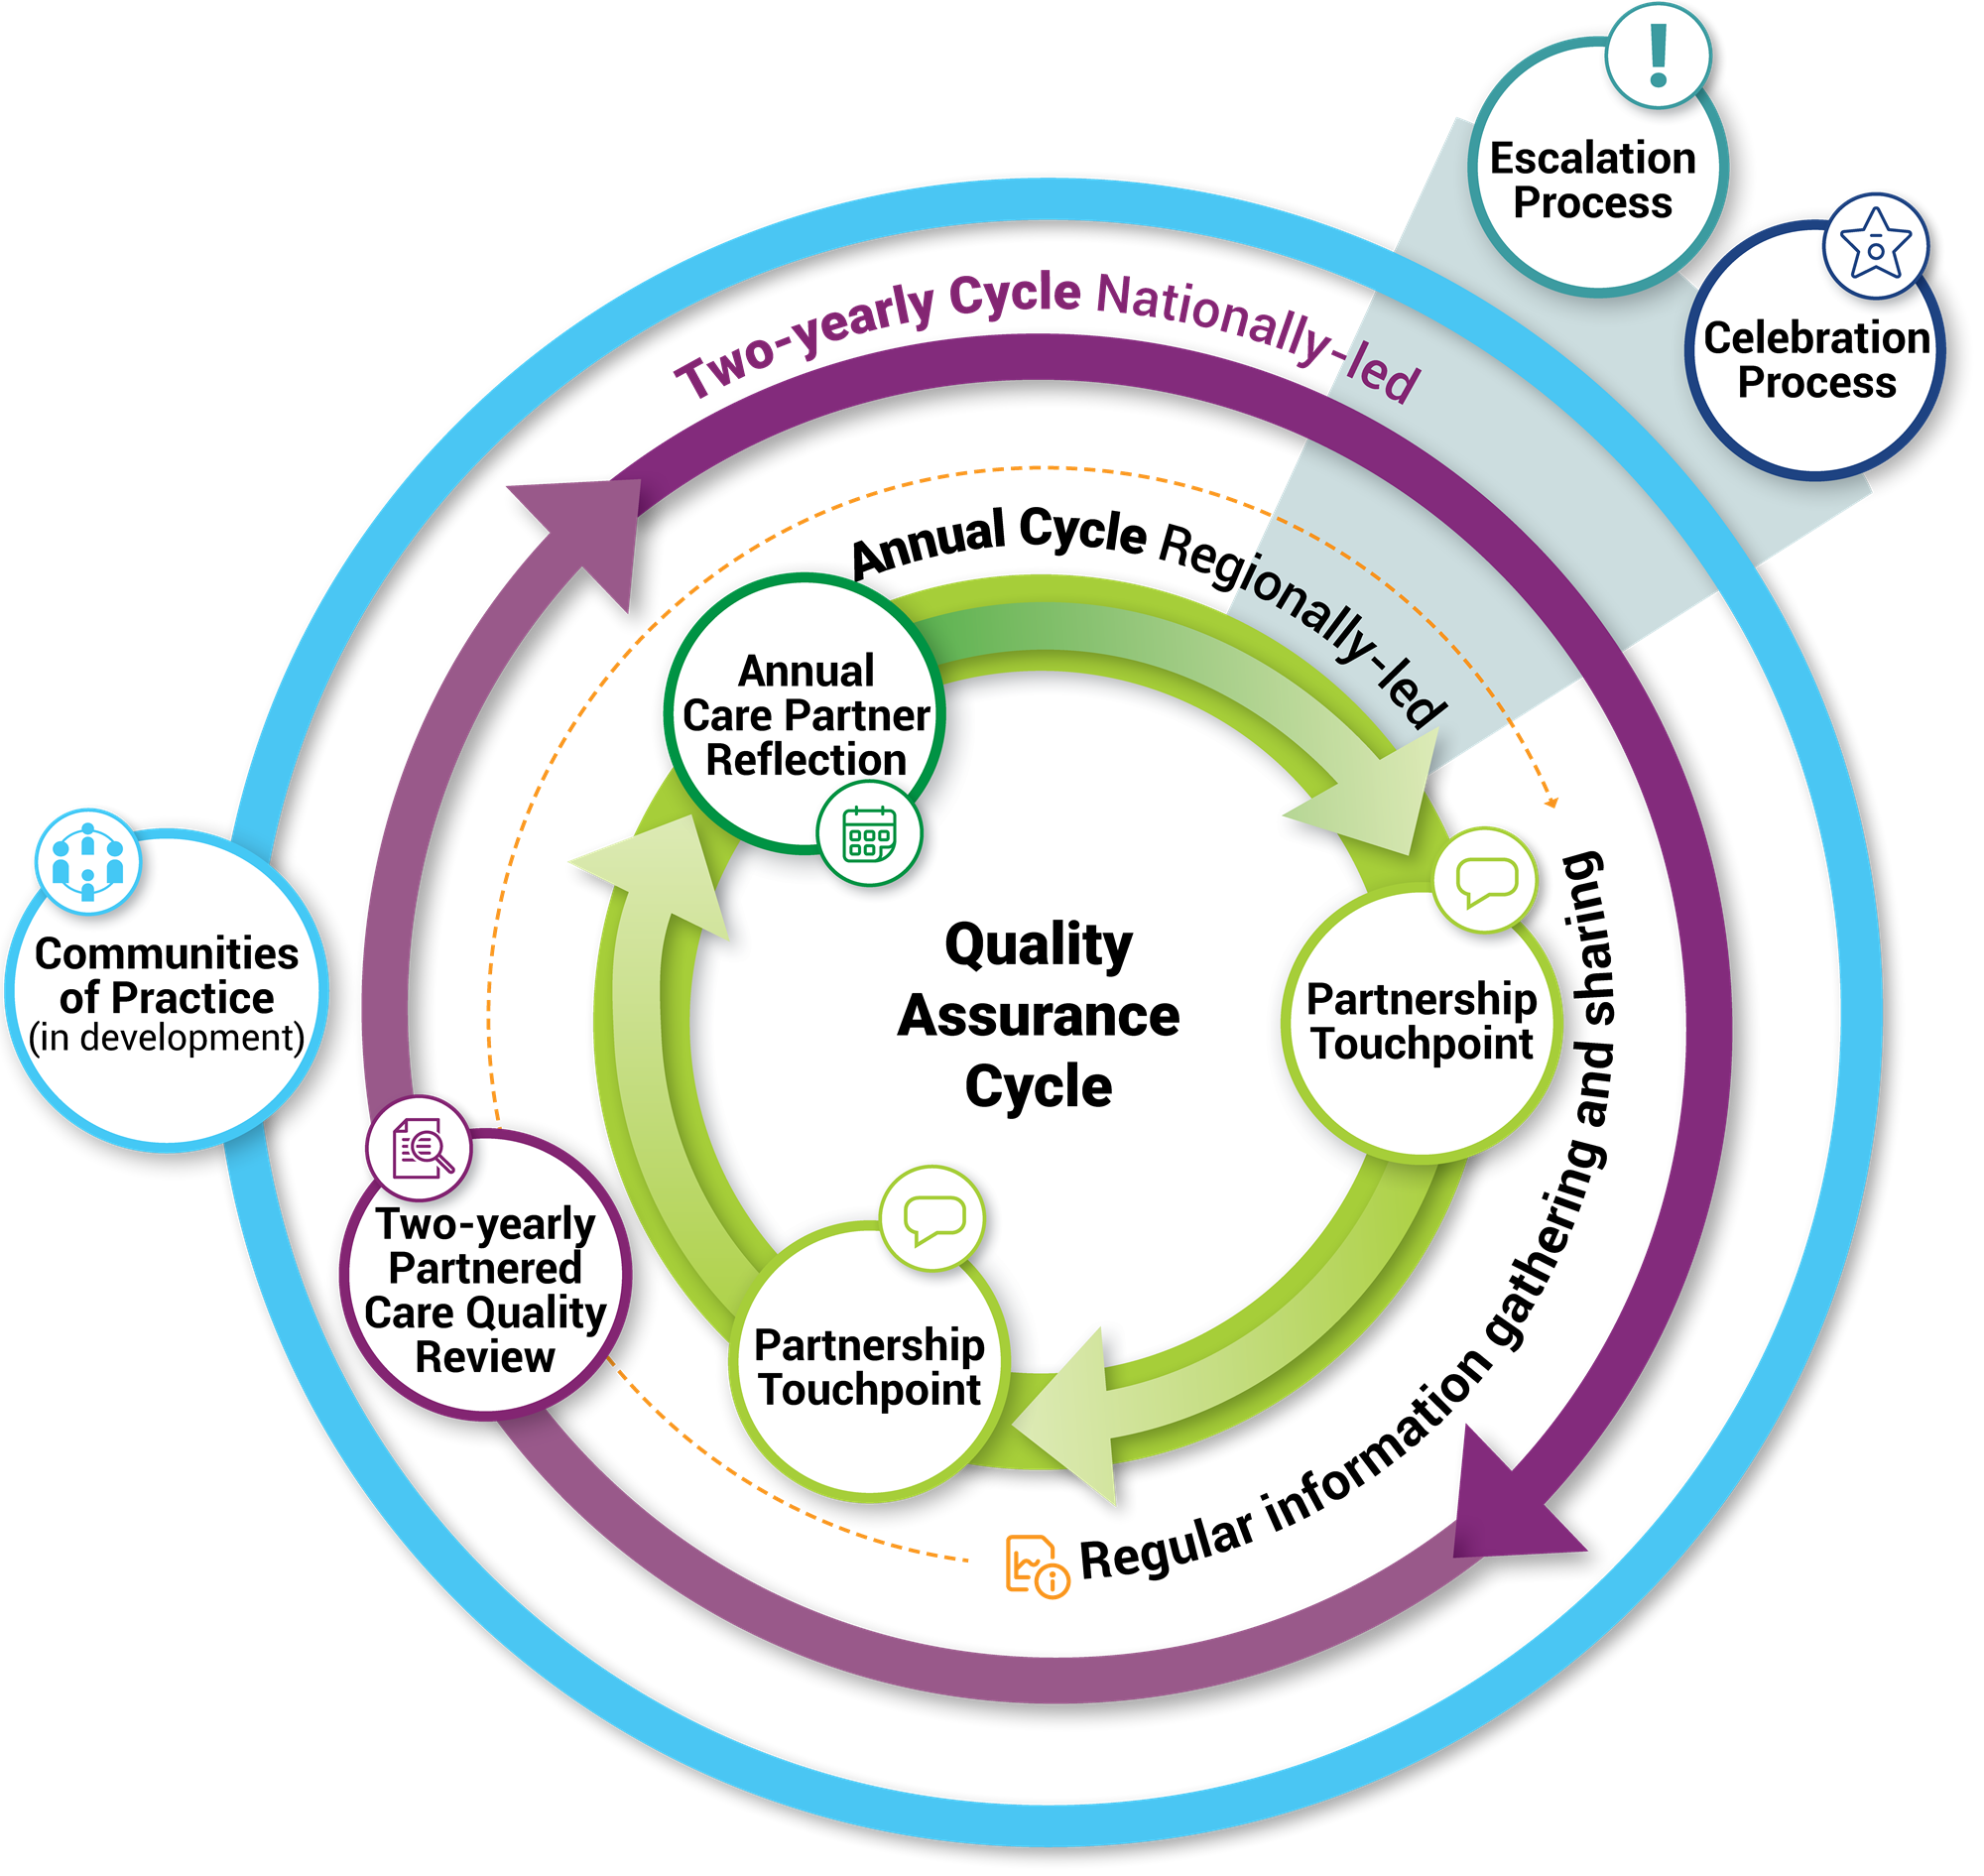 Quality Assurance Cycle infographic